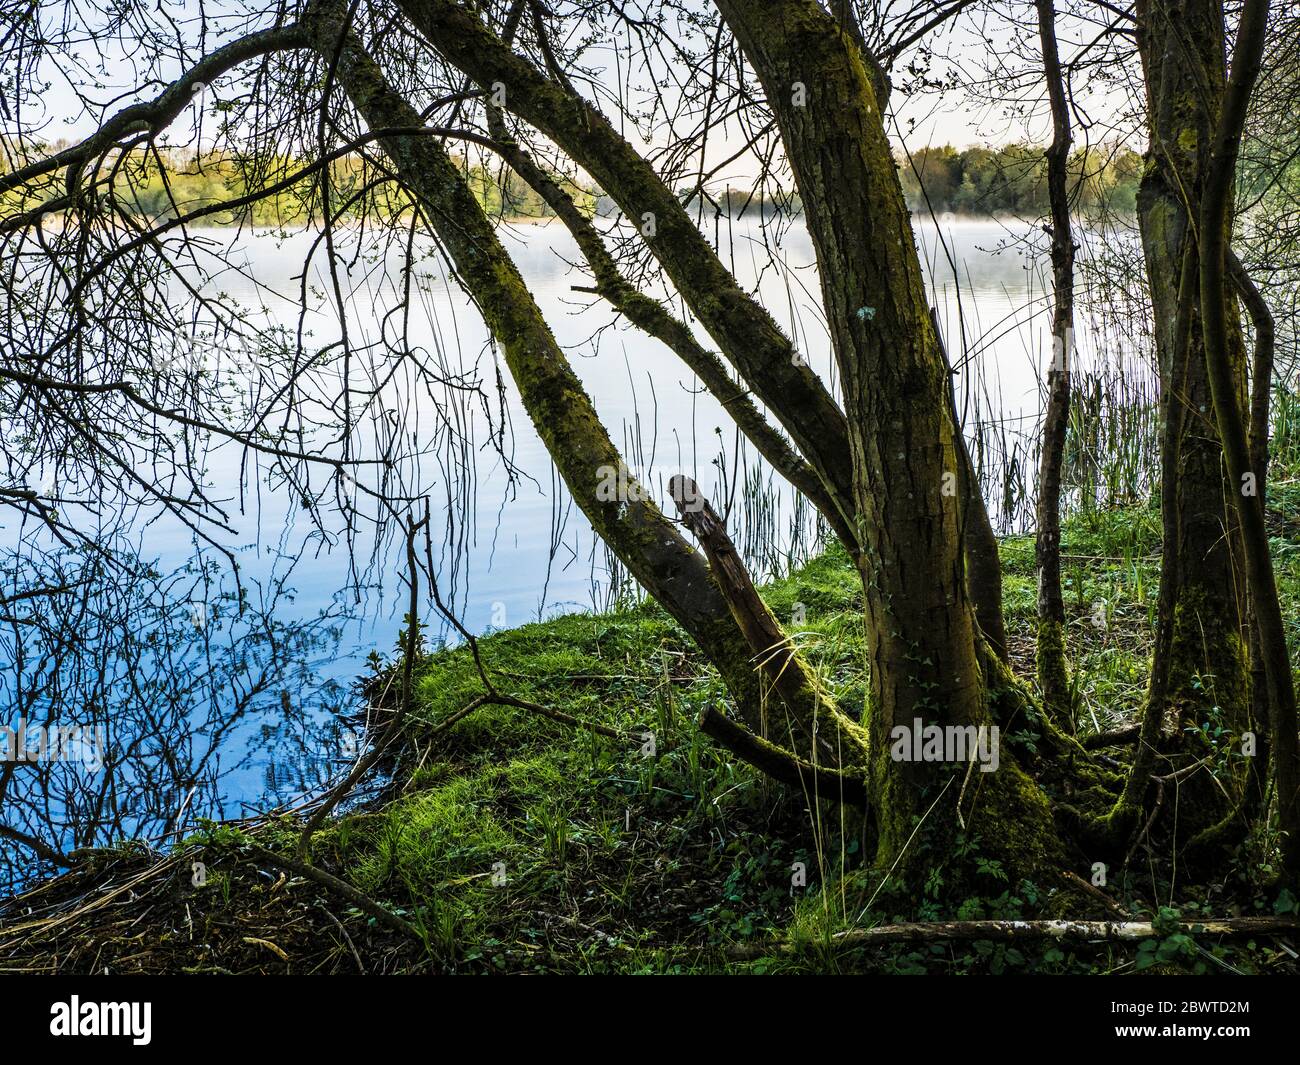 A sunny, spring morning at Coate Water in Swindon. Stock Photo